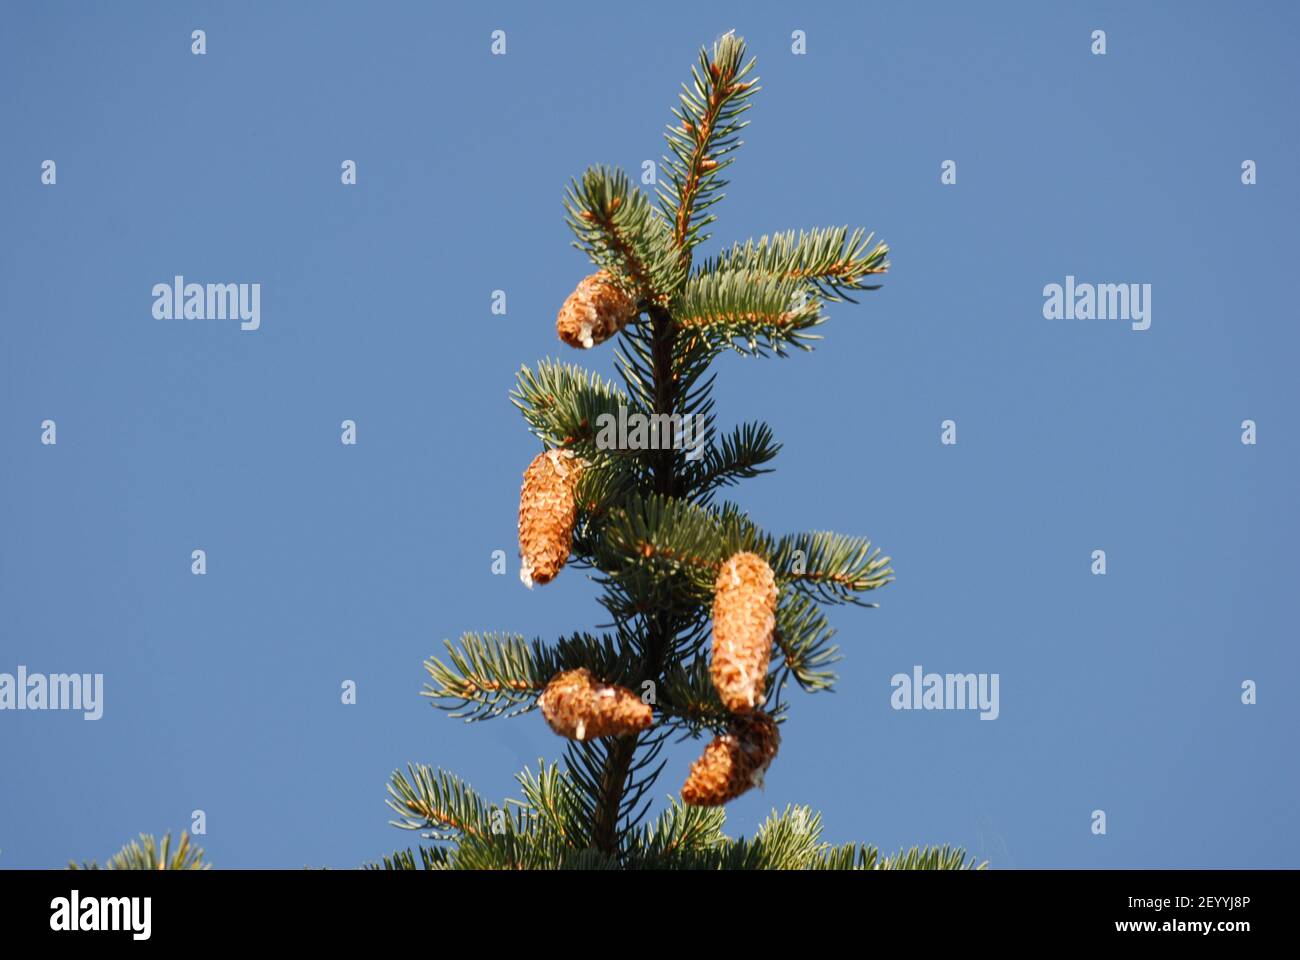 Picea punges, picea abies, pinaceae, cones of the spruce, cones, spruce, Stock Photo